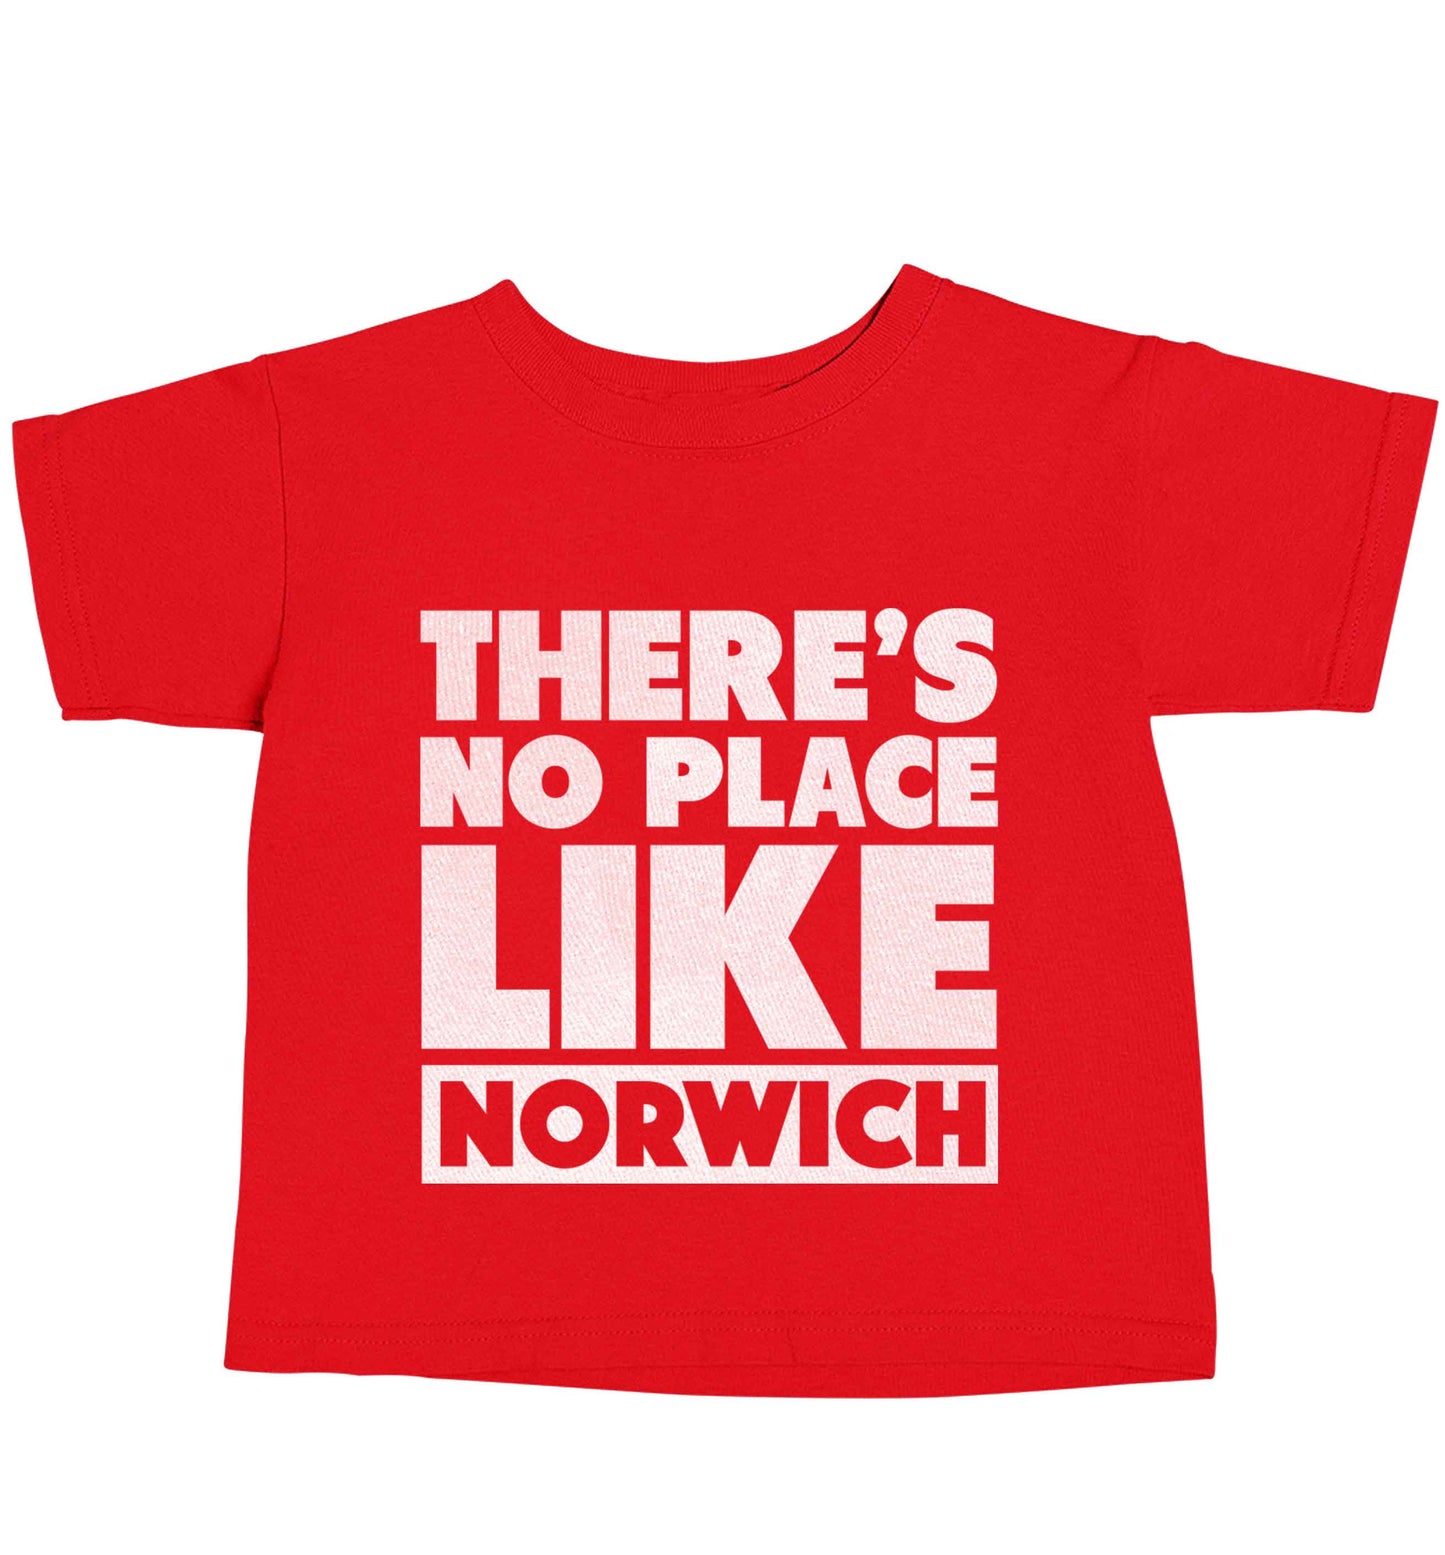 There's no place like Norwich red baby toddler Tshirt 2 Years